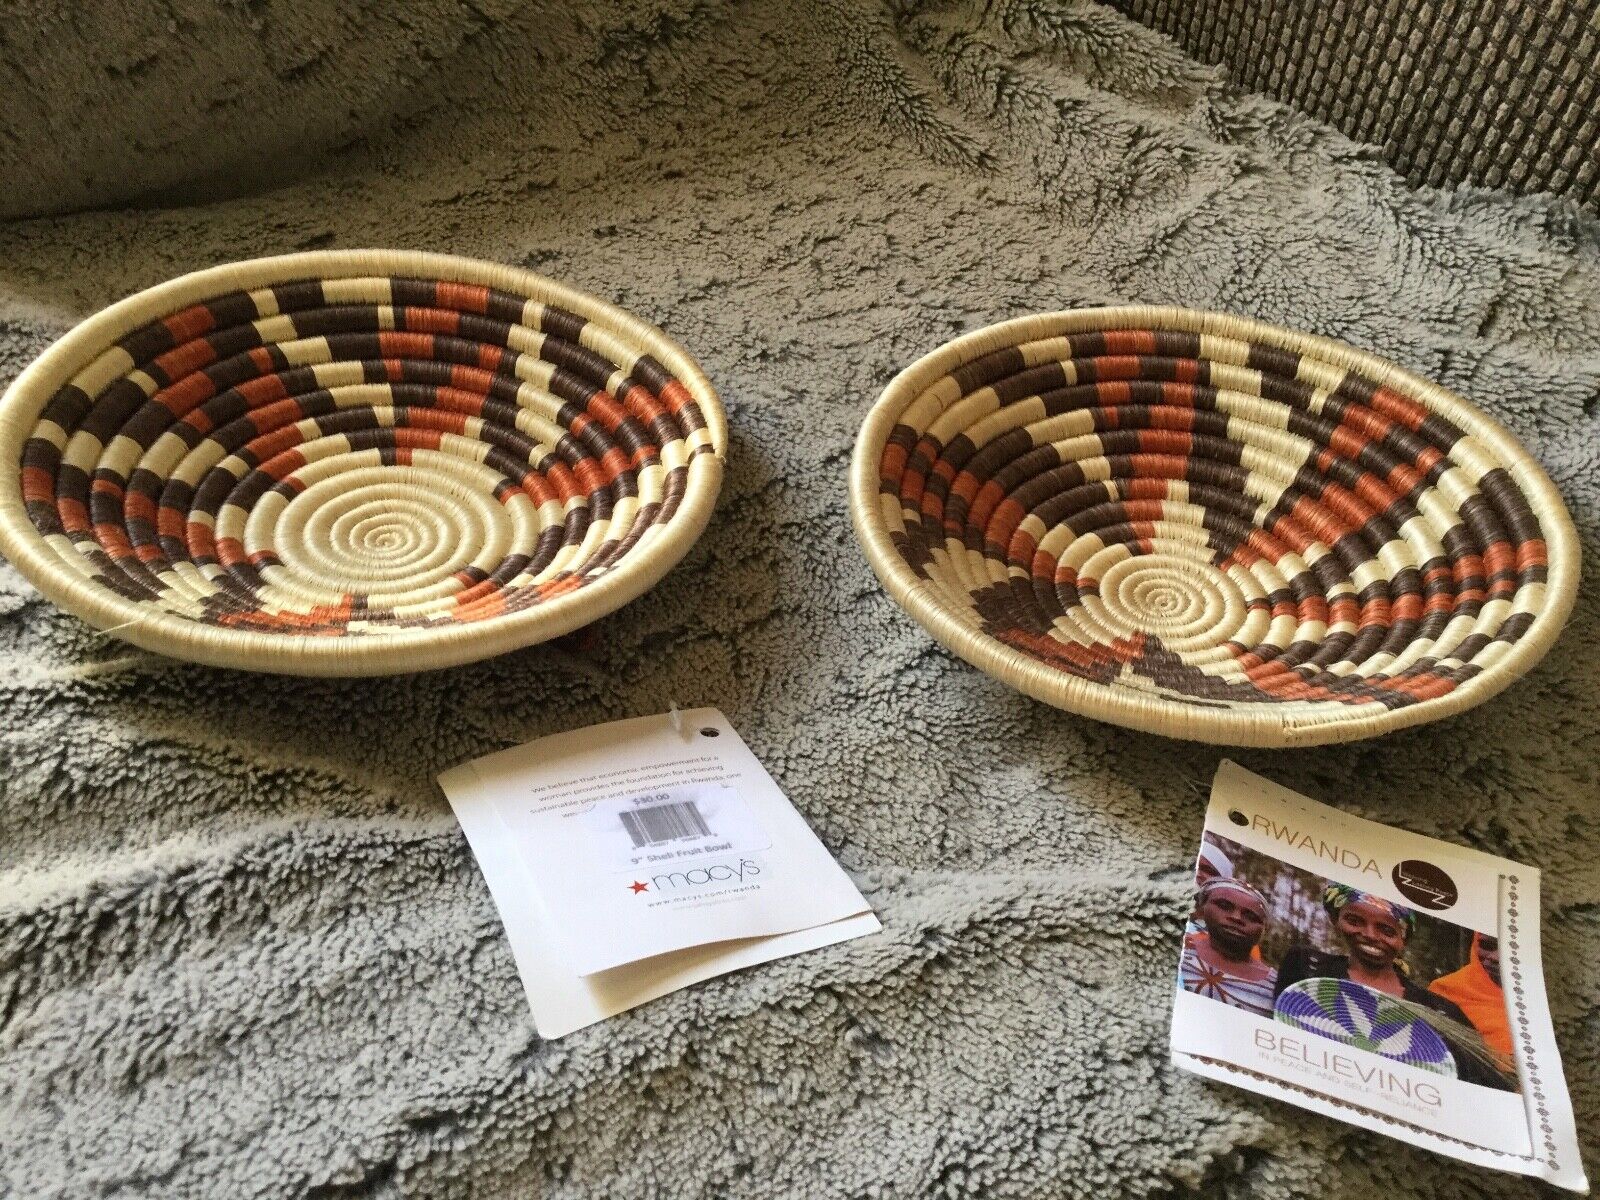 2 rwanda signed baskets 8 1/2 x 2 7/8 high.  Very pleasant colors. in new shape